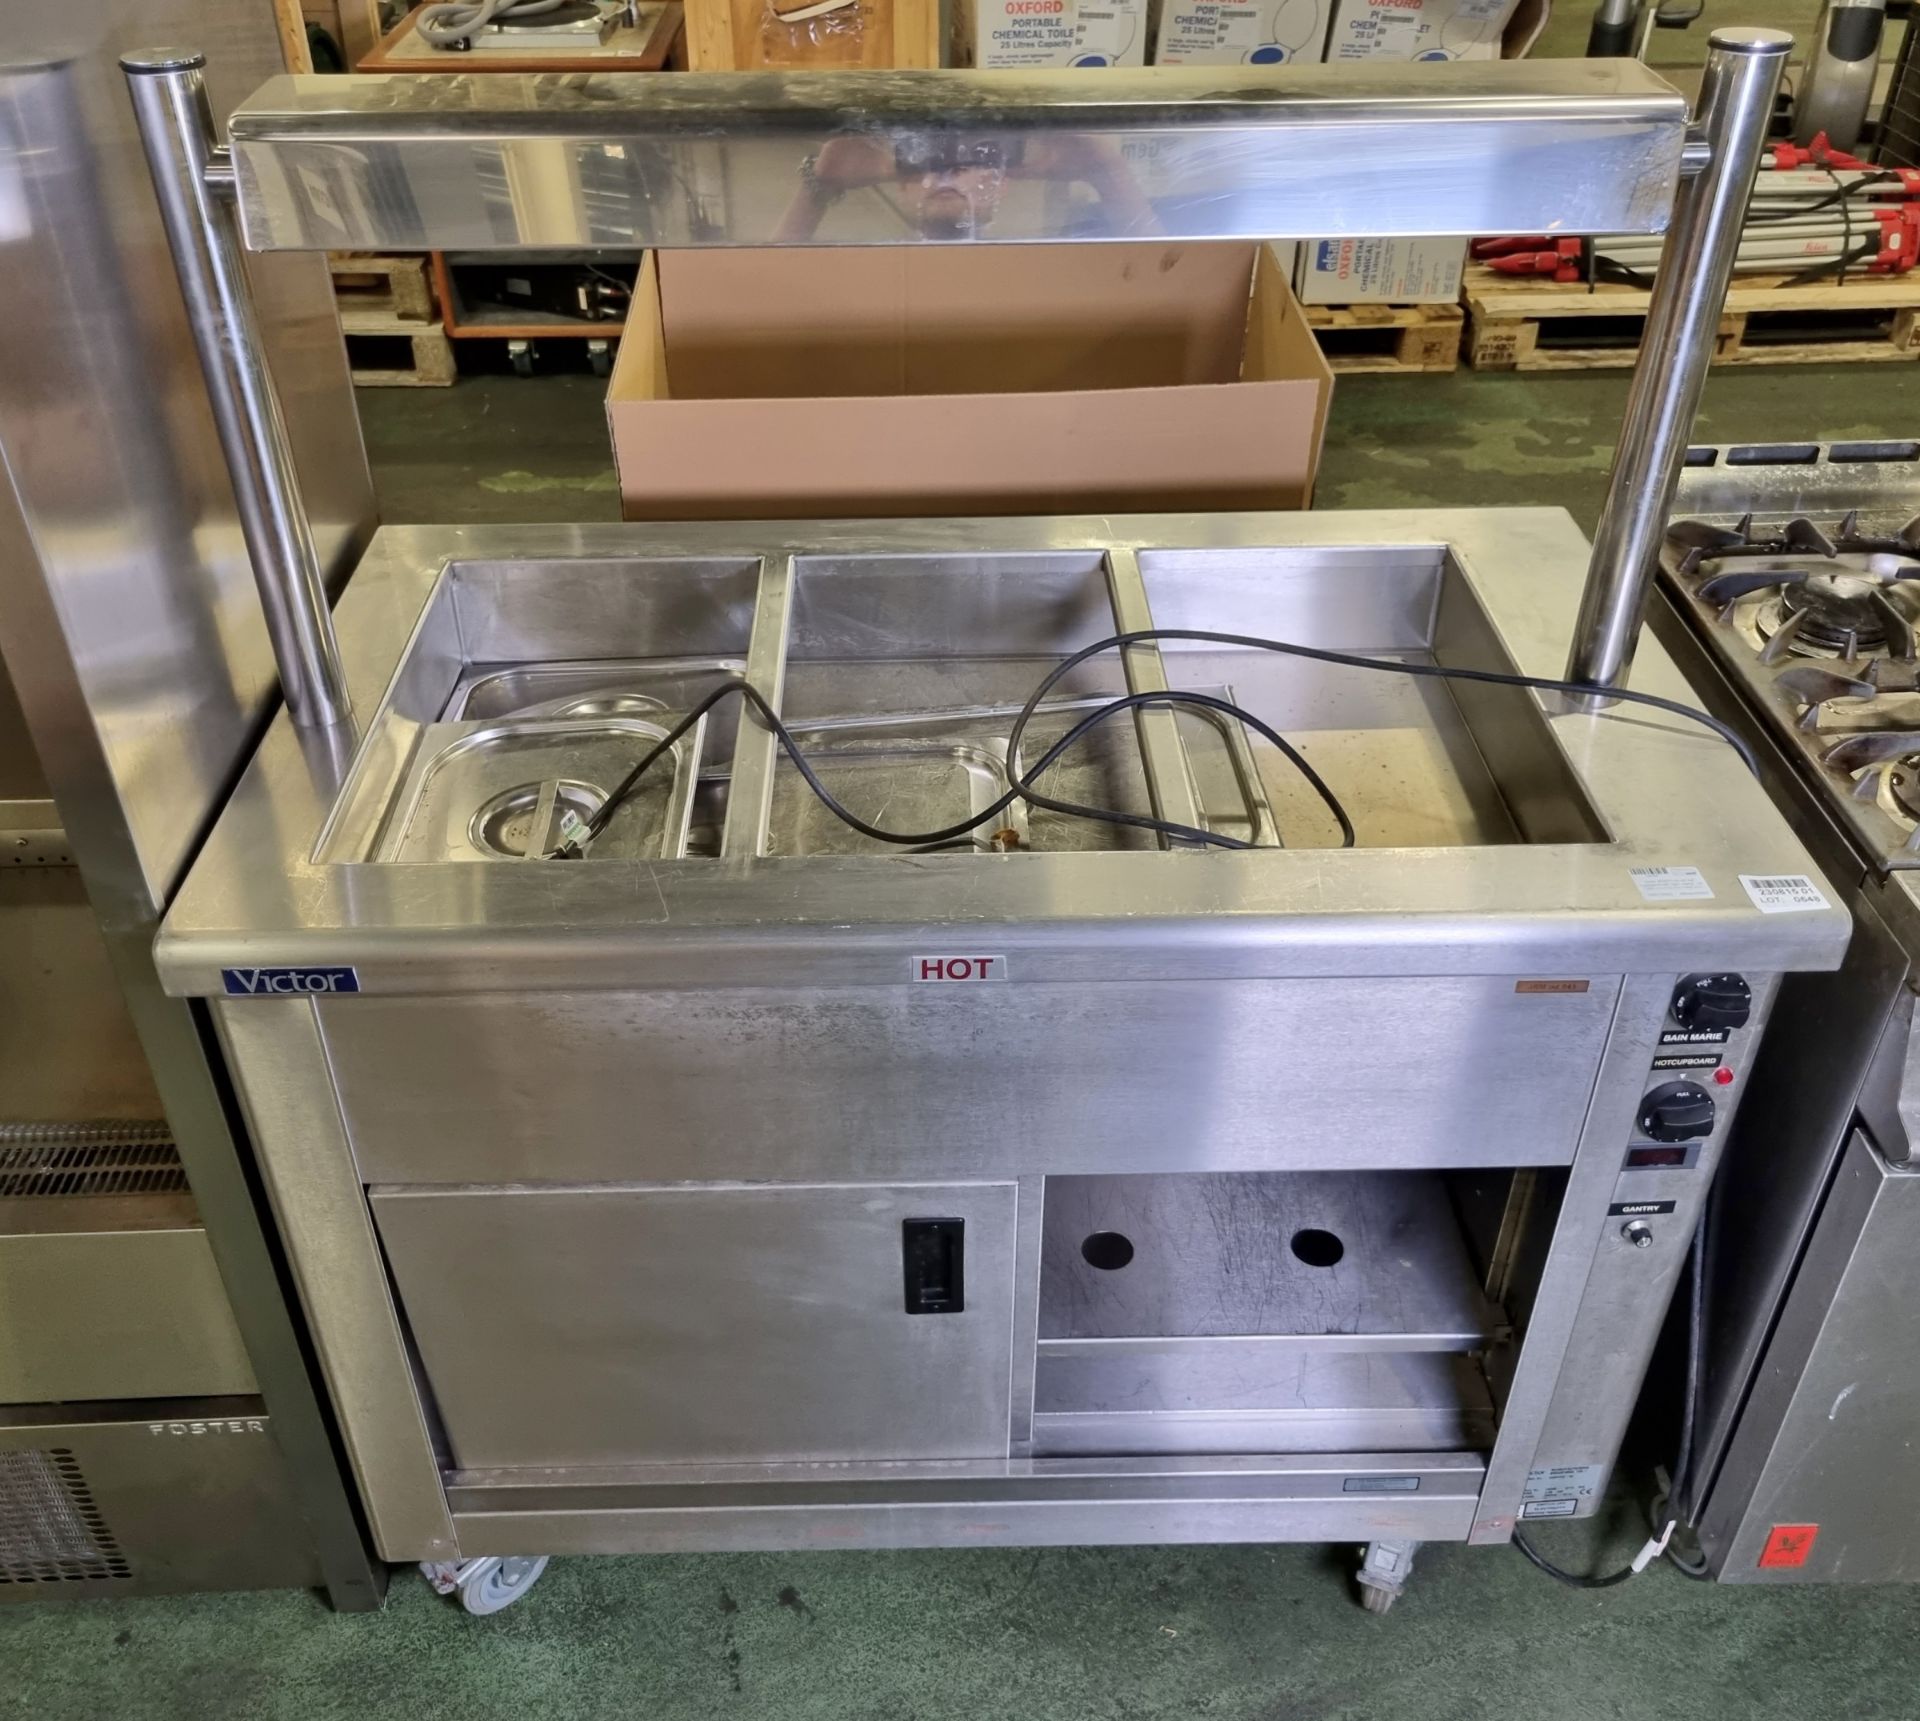 Victor SCEP12Z-42 hot cupboard with bain marie - W 1200 x D 710 x H 1440 mm - Image 2 of 6